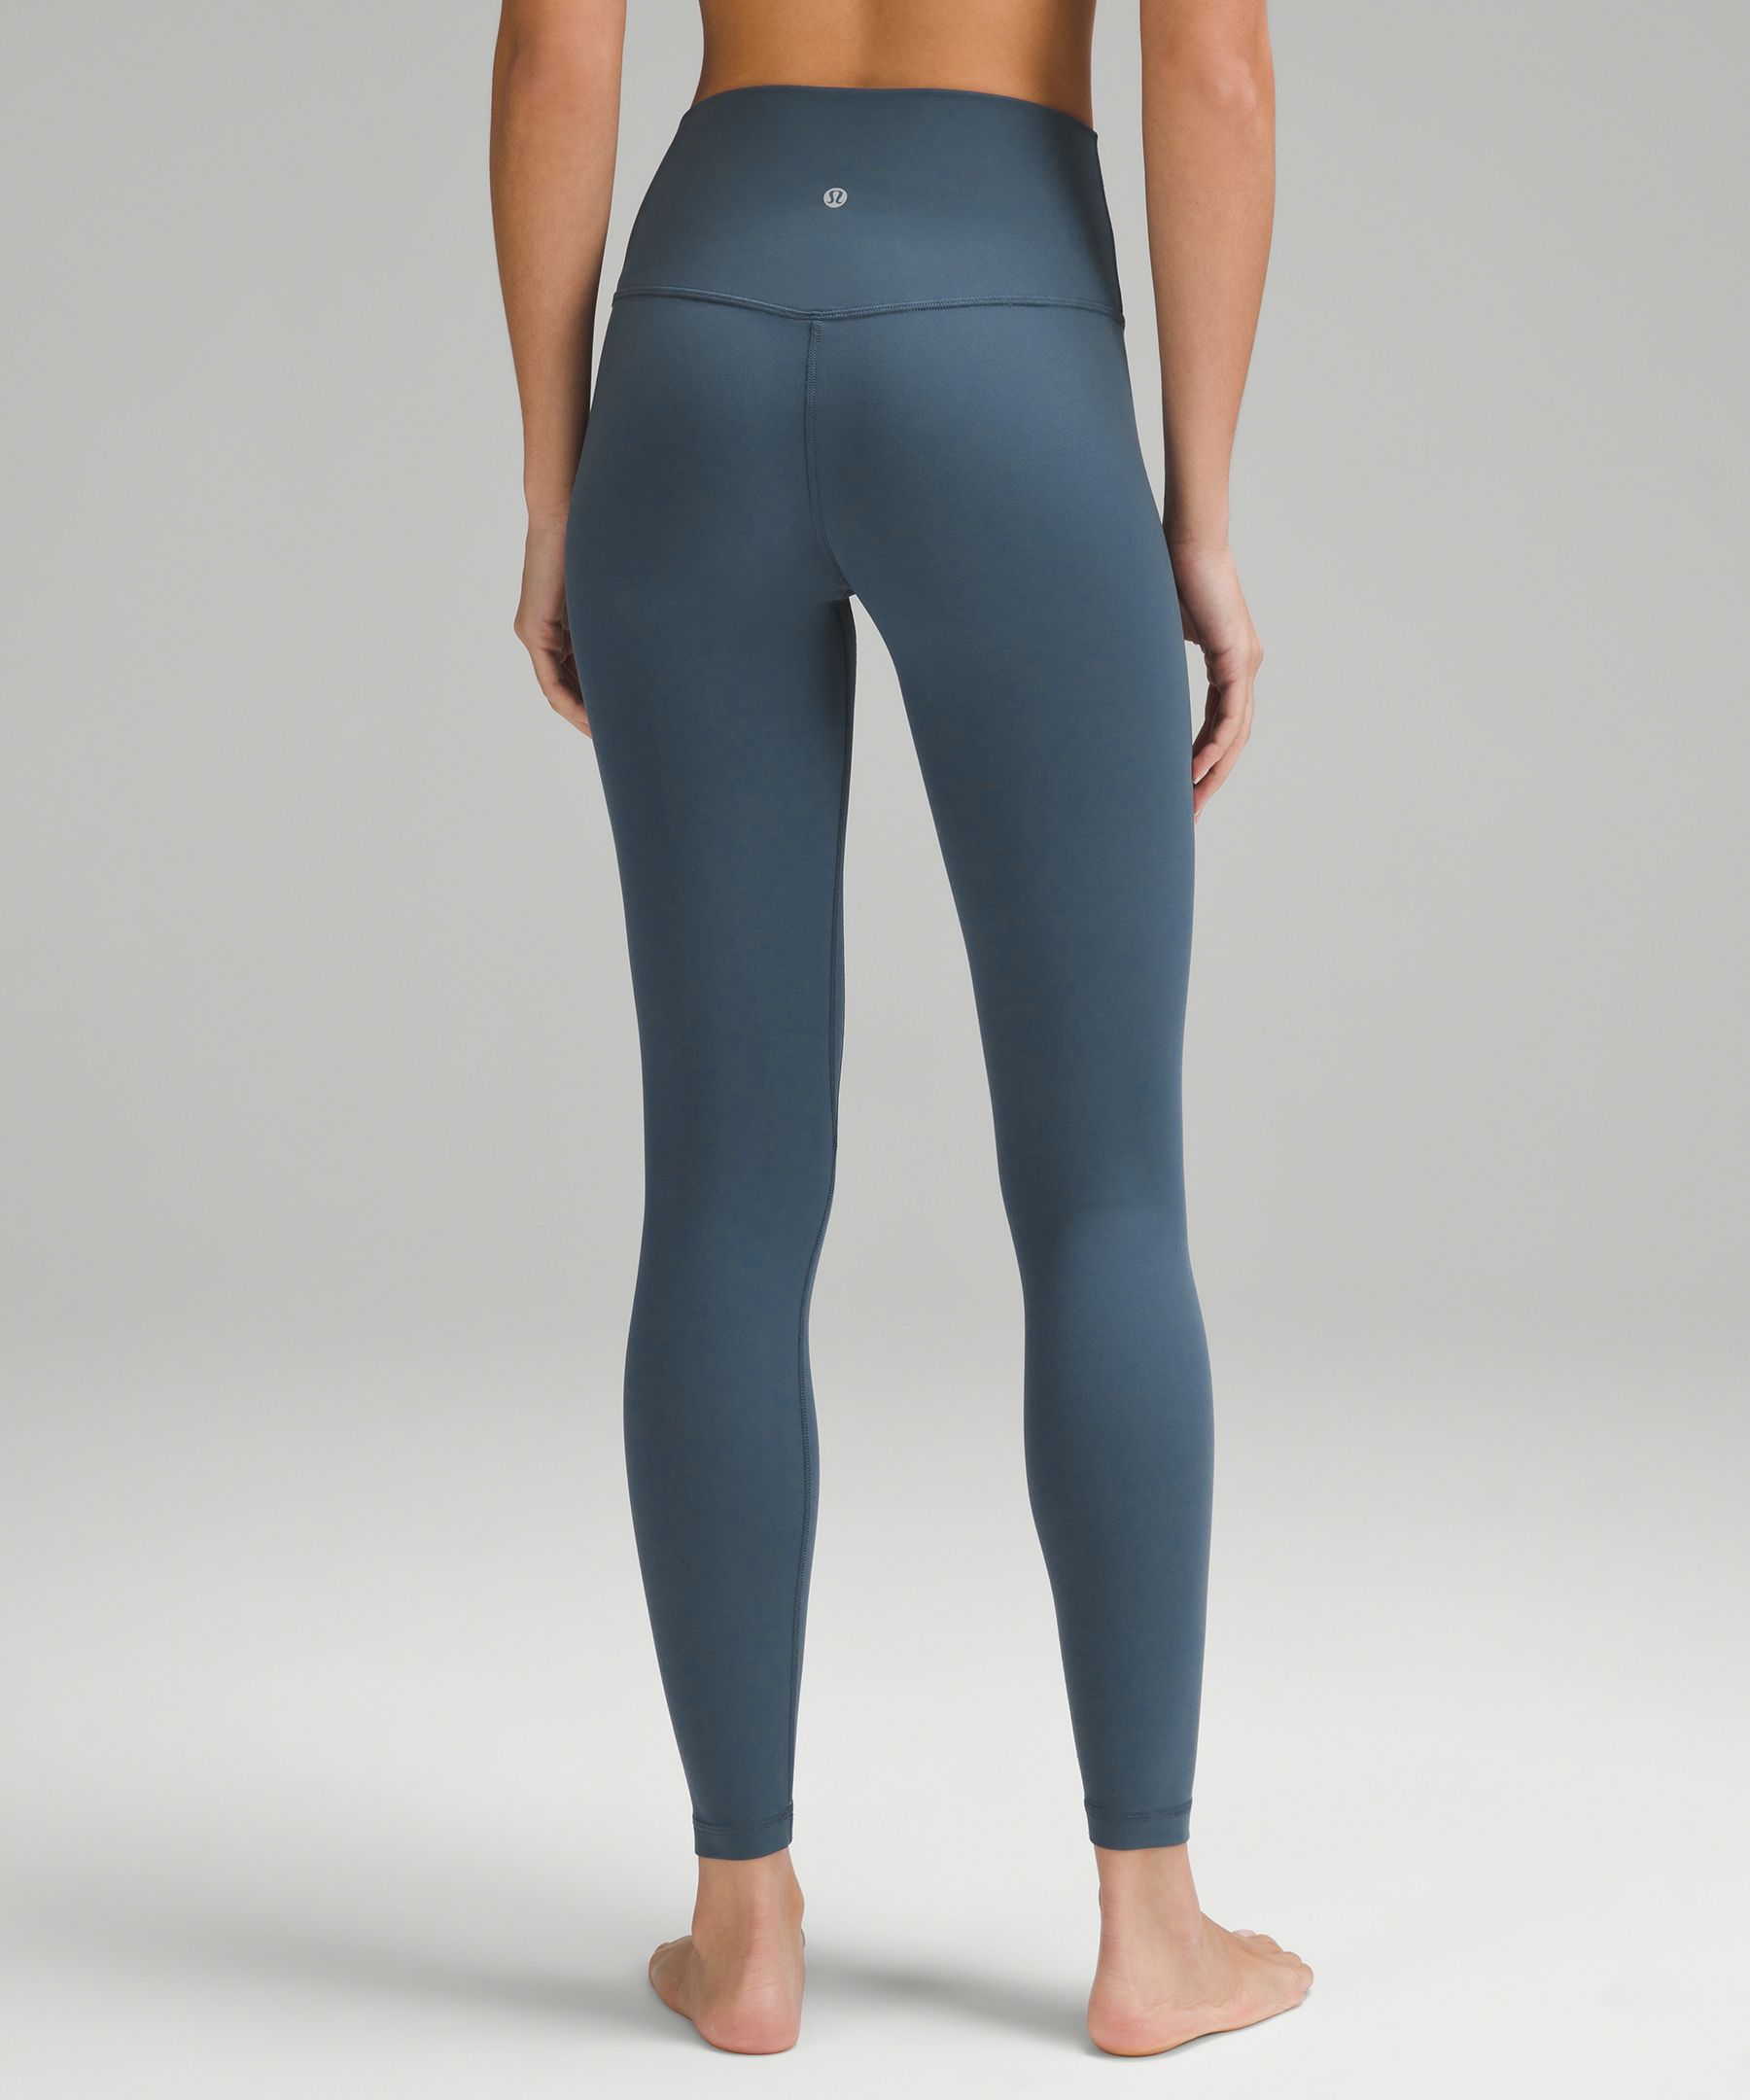 Lululemon Align™ High-Rise Pant with Pockets 31, Women's Leggings/Tights